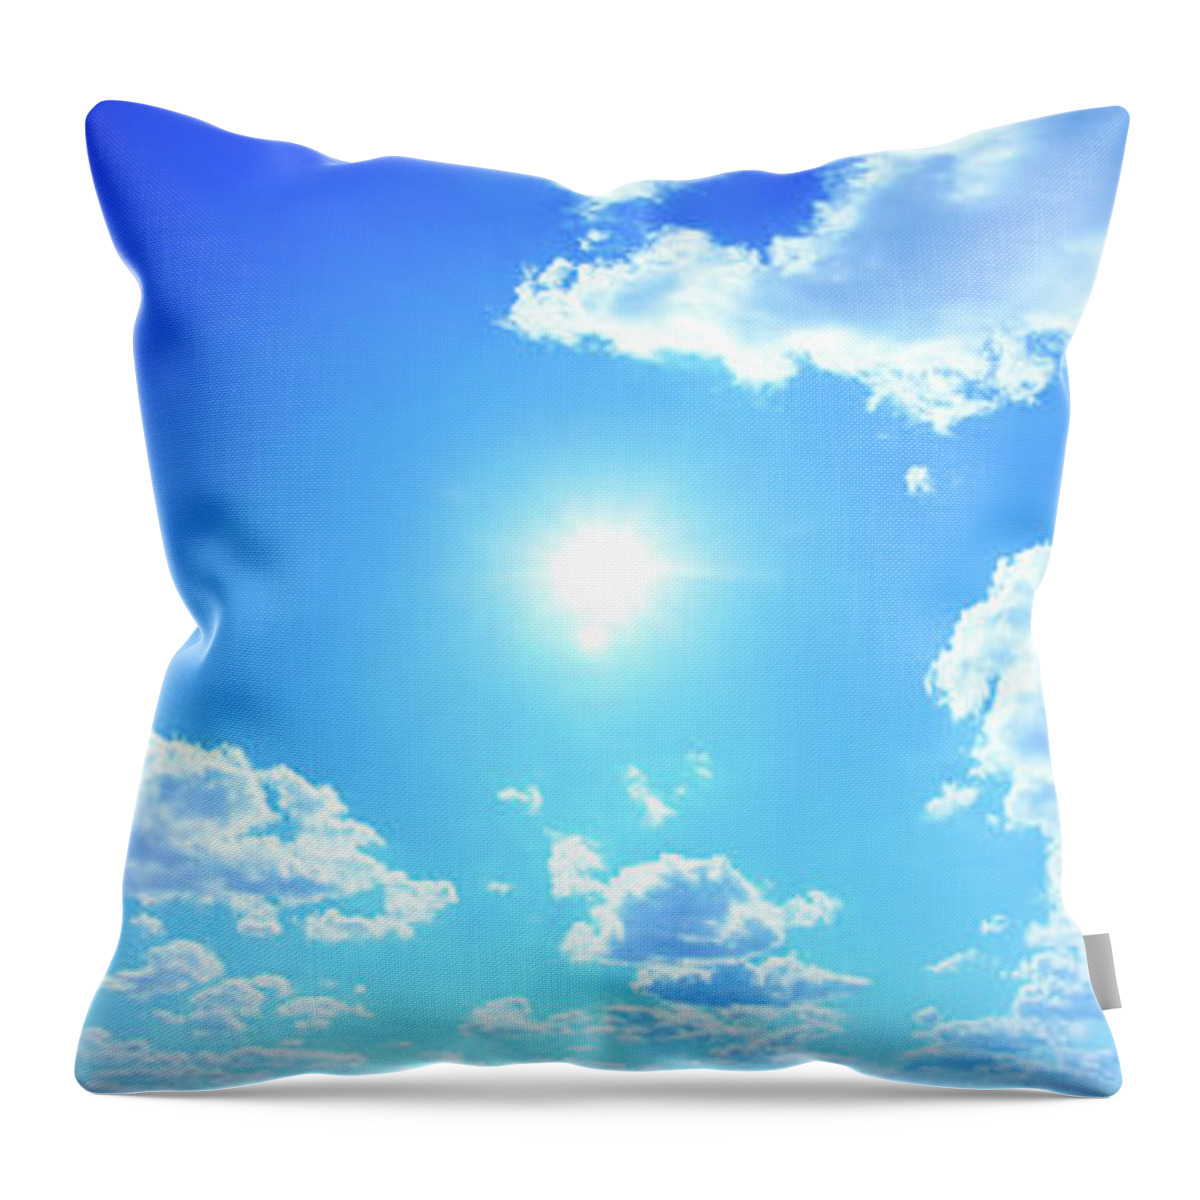 Scenics Throw Pillow featuring the photograph Blue Sky Panorama #1 by Konradlew